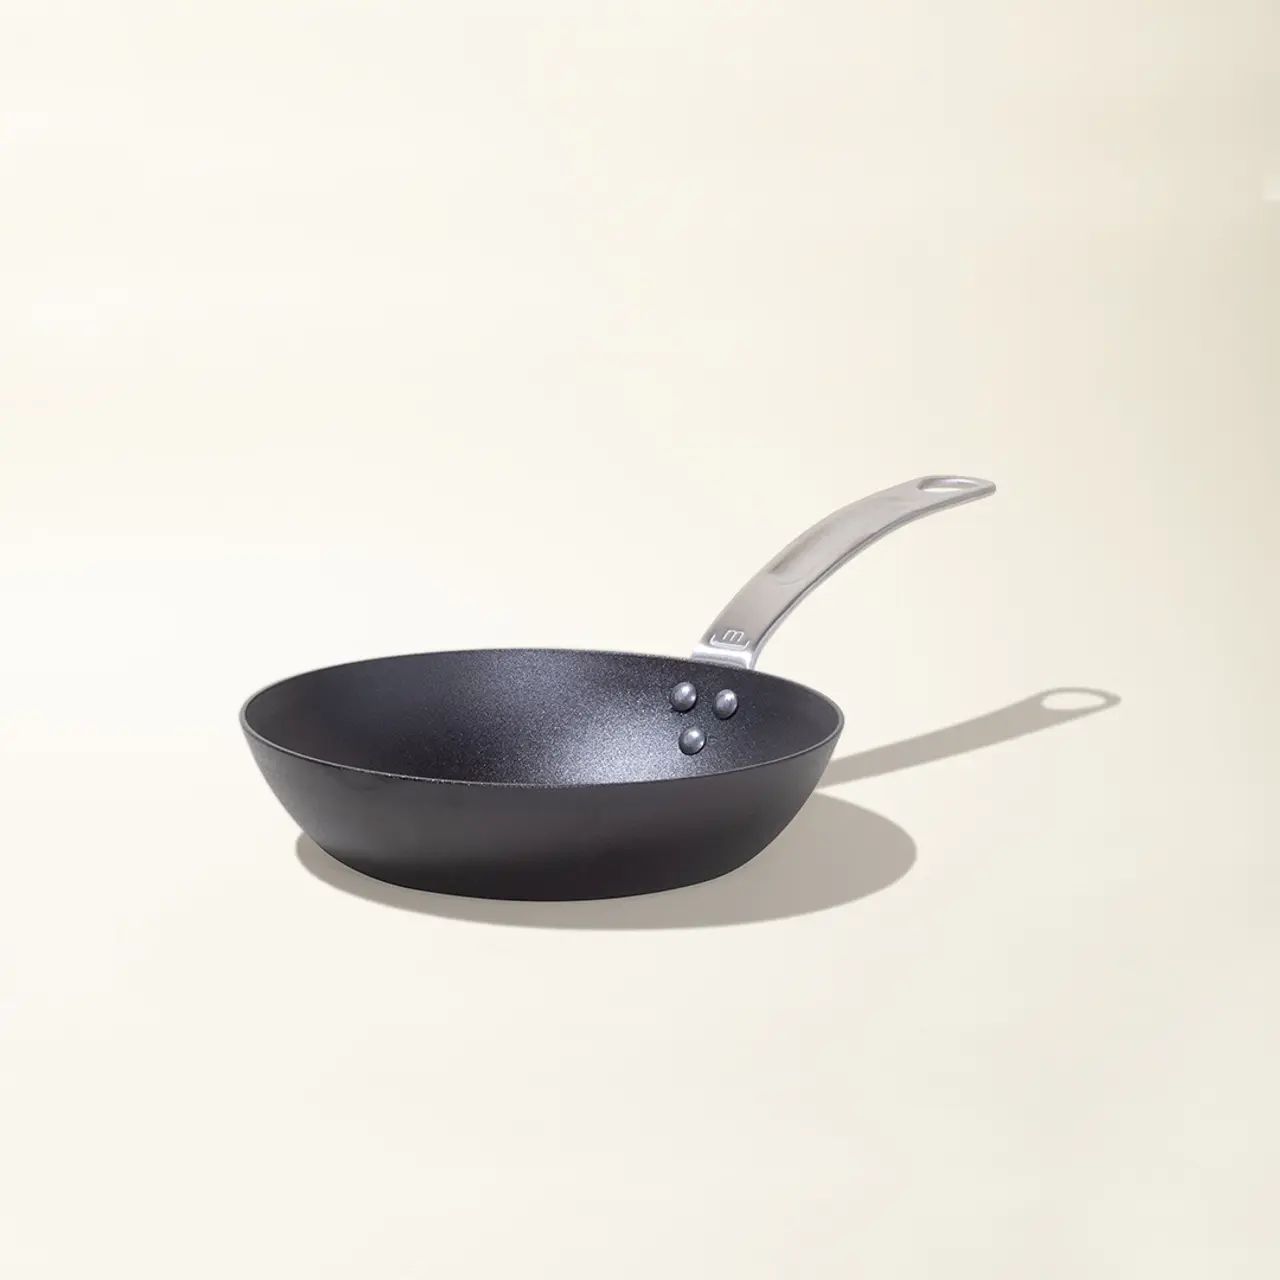 A black frying pan with a silver handle is centered against a light background.